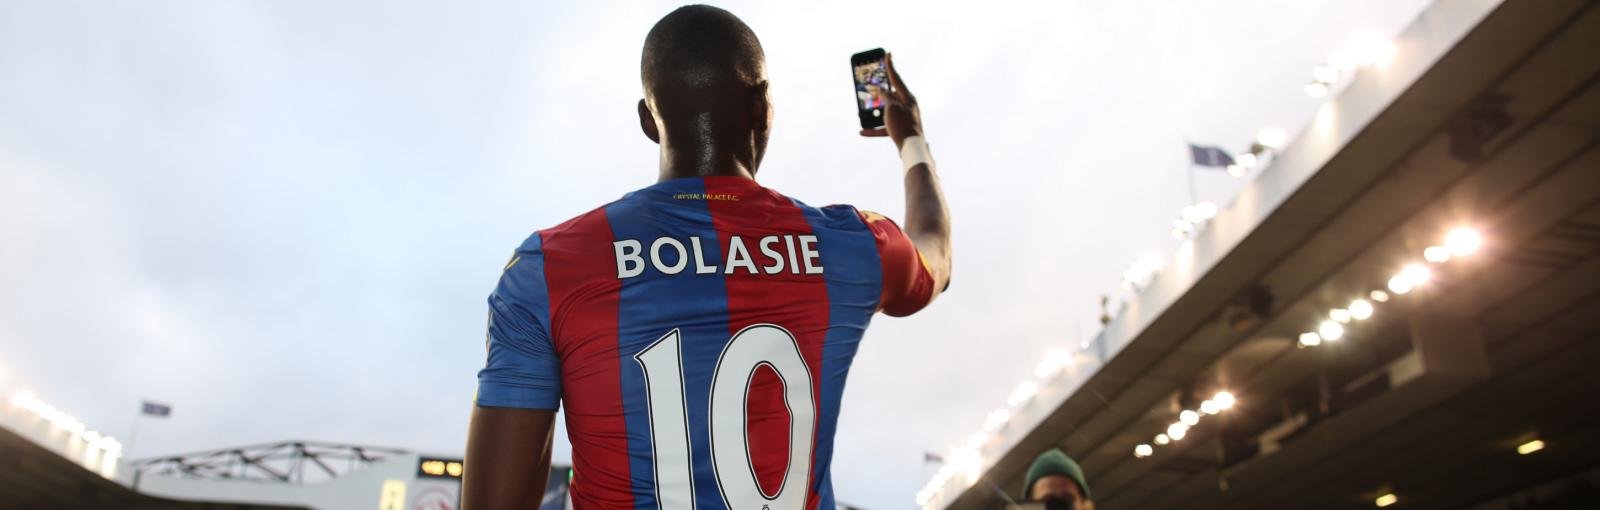 3 things we learnt from Crystal Palace’s 2015/16 season